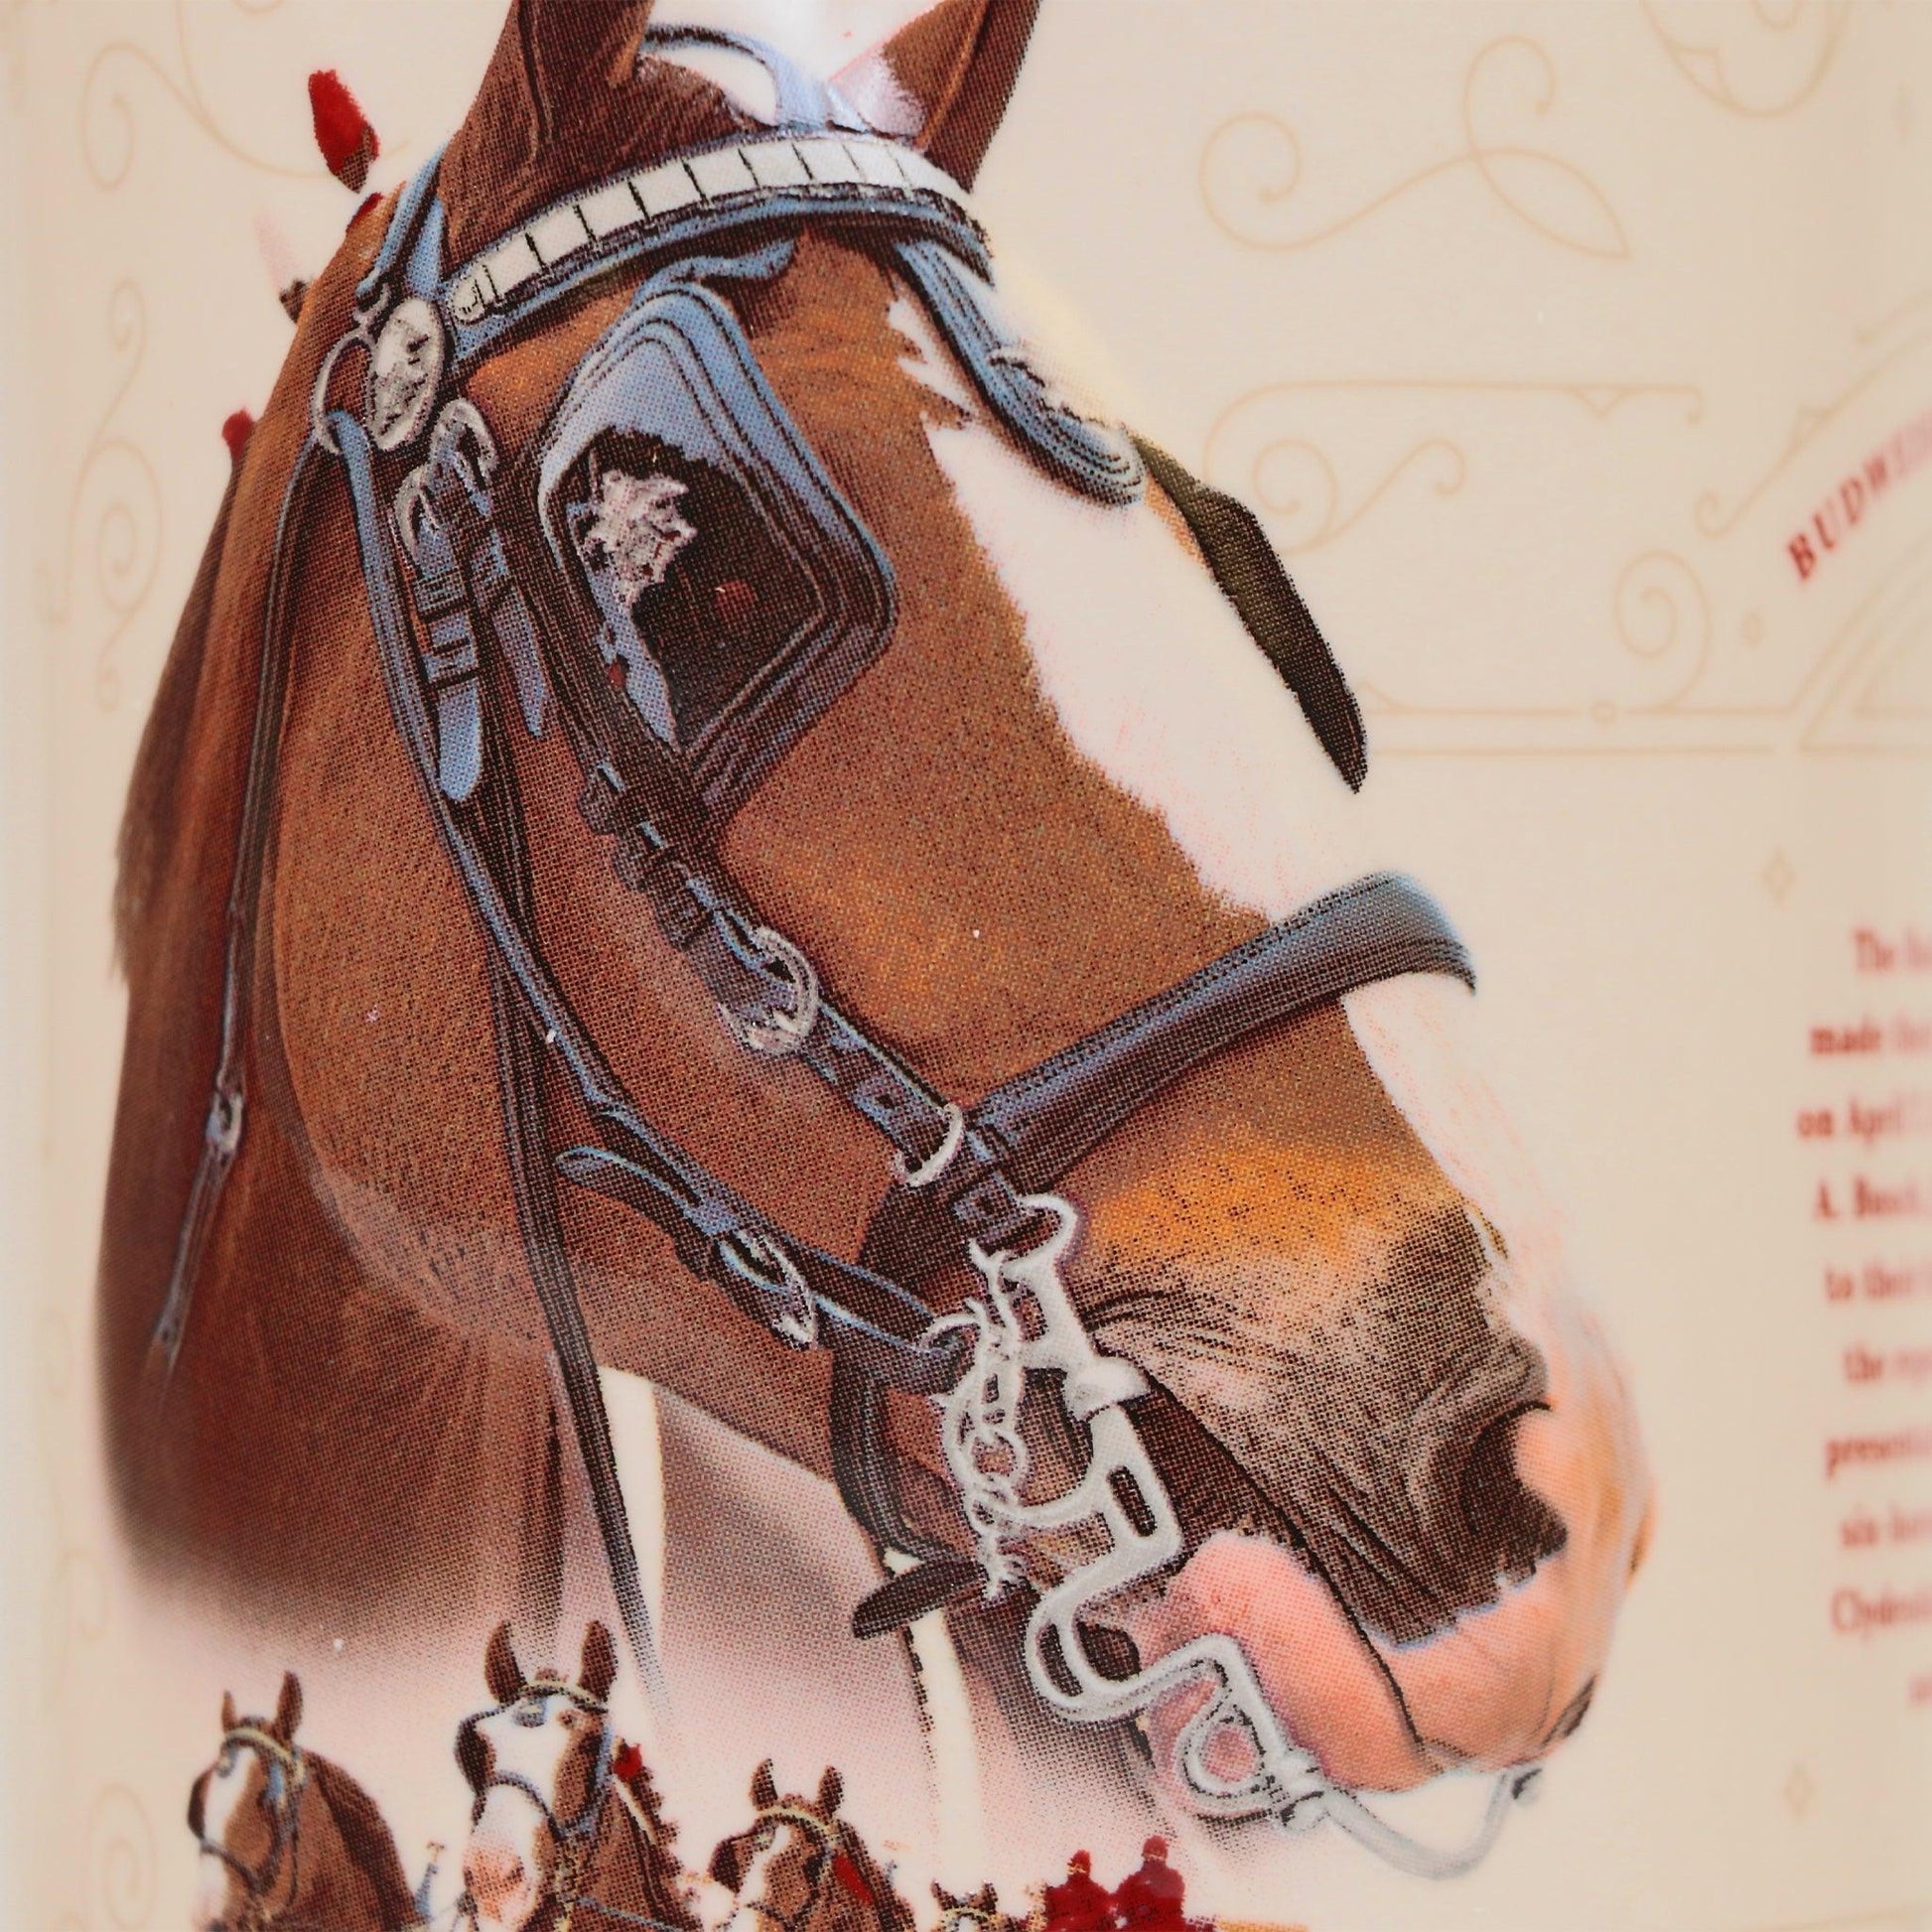 2023 Budweiser Holiday Stein Clydesdale Detailed Closeup